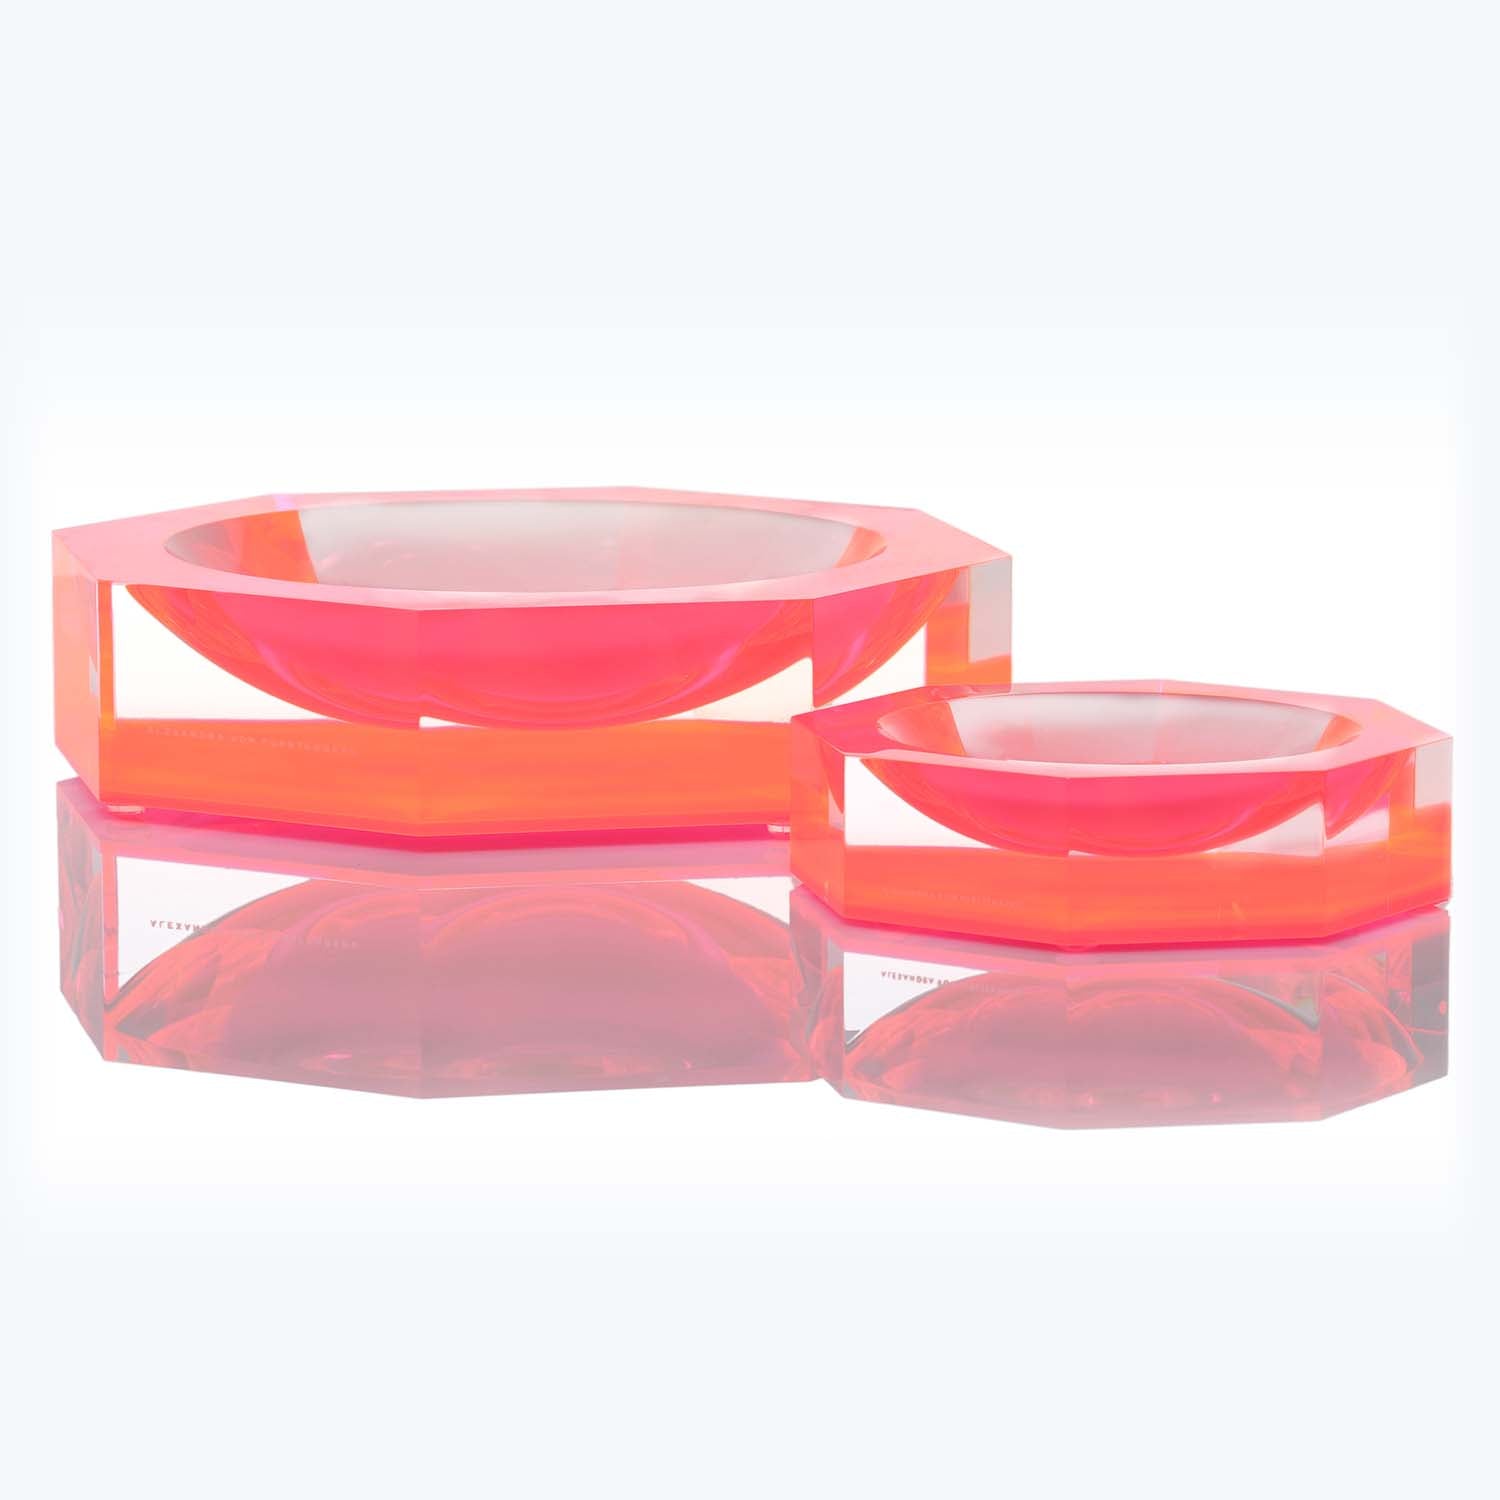 Modern, minimalist red-tinted acrylic decor pieces with glossy reflections.